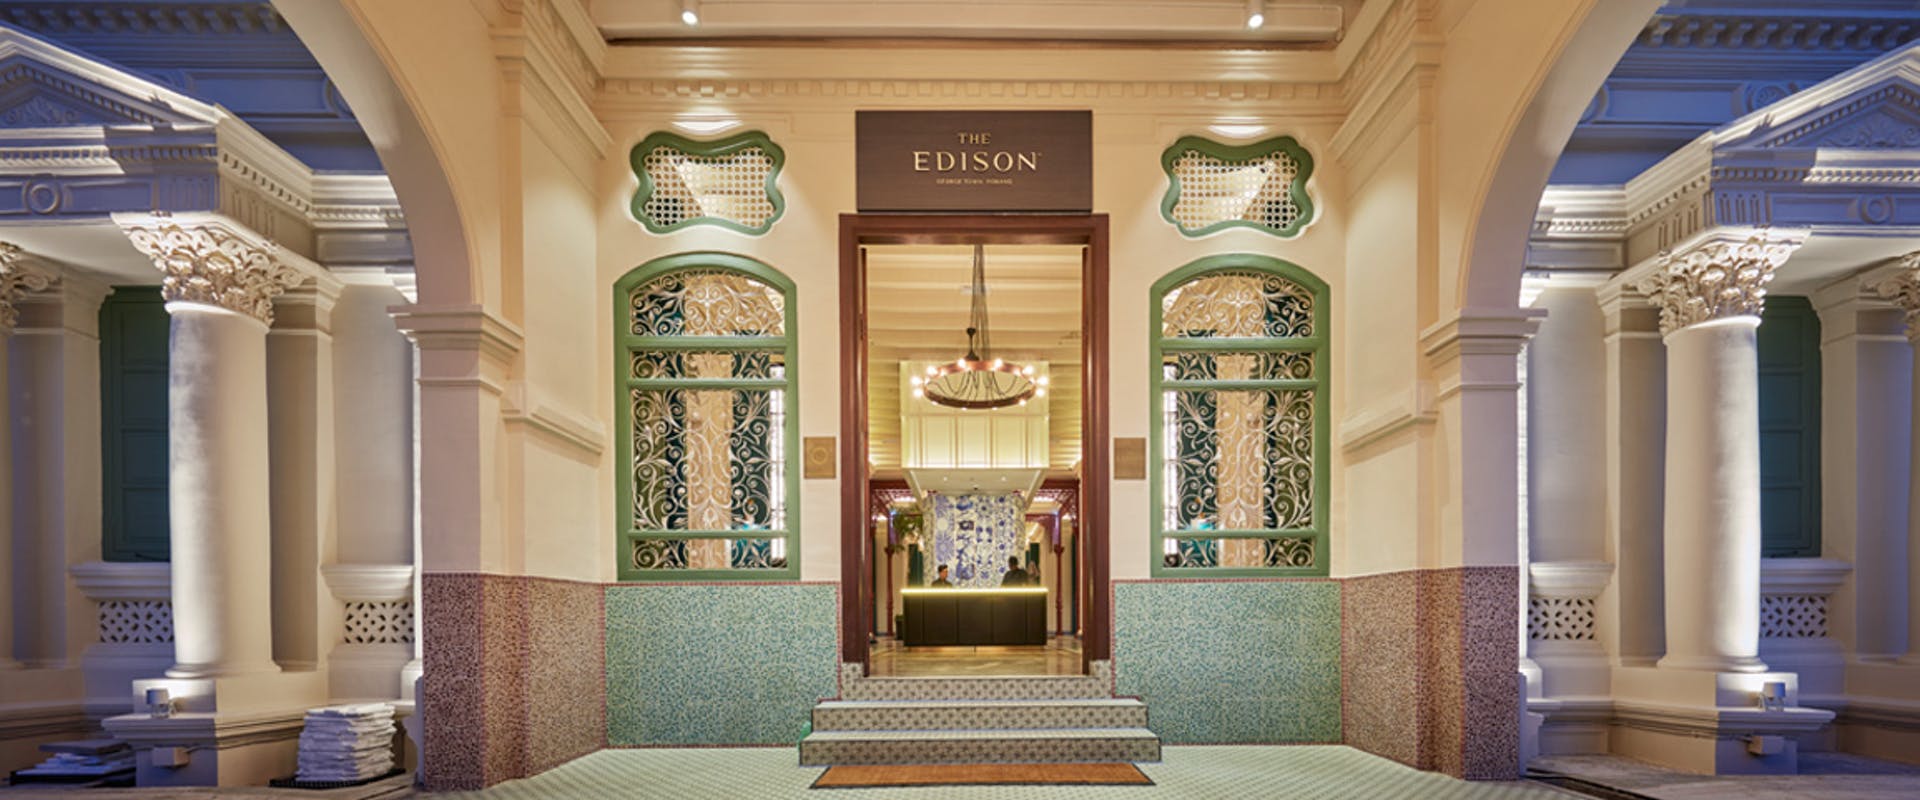 Review: The Edison George Town